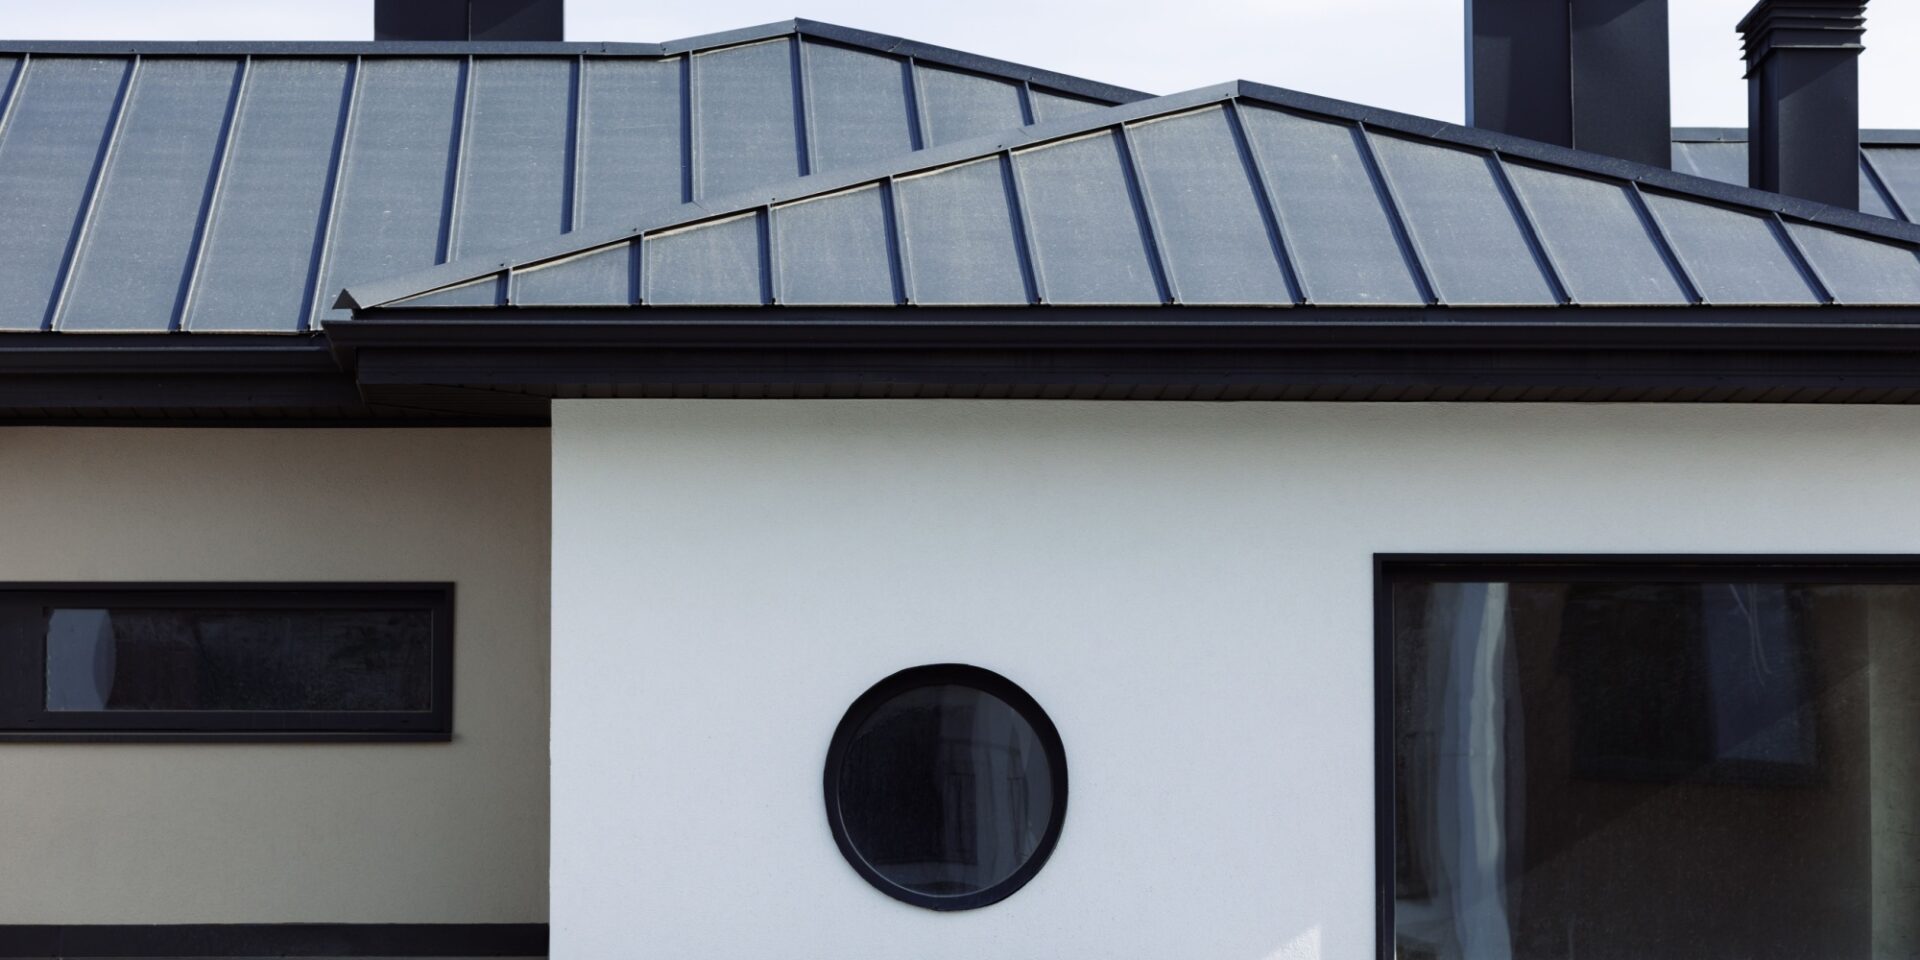 Types of Metal Roof Panels